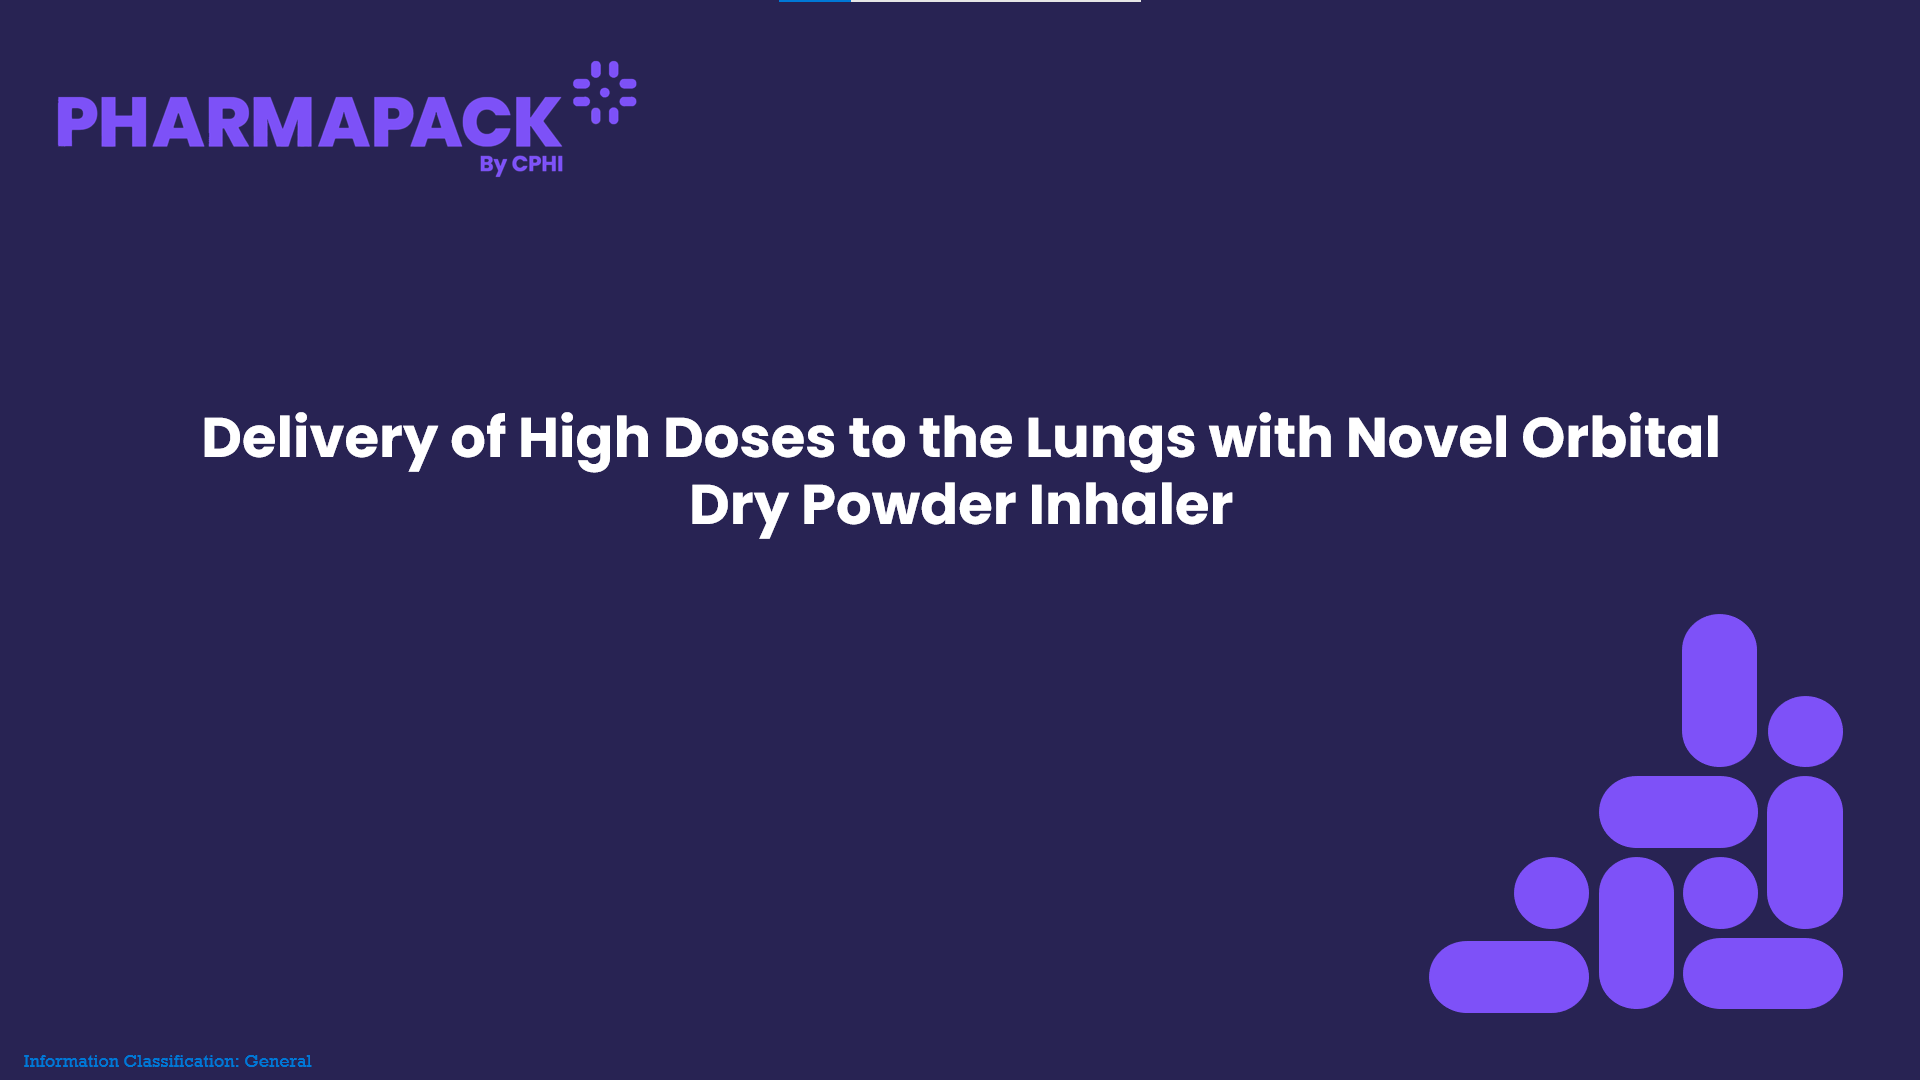 Delivery of High Doses to the Lungs with Novel Orbital Dry Powder Inhaler.